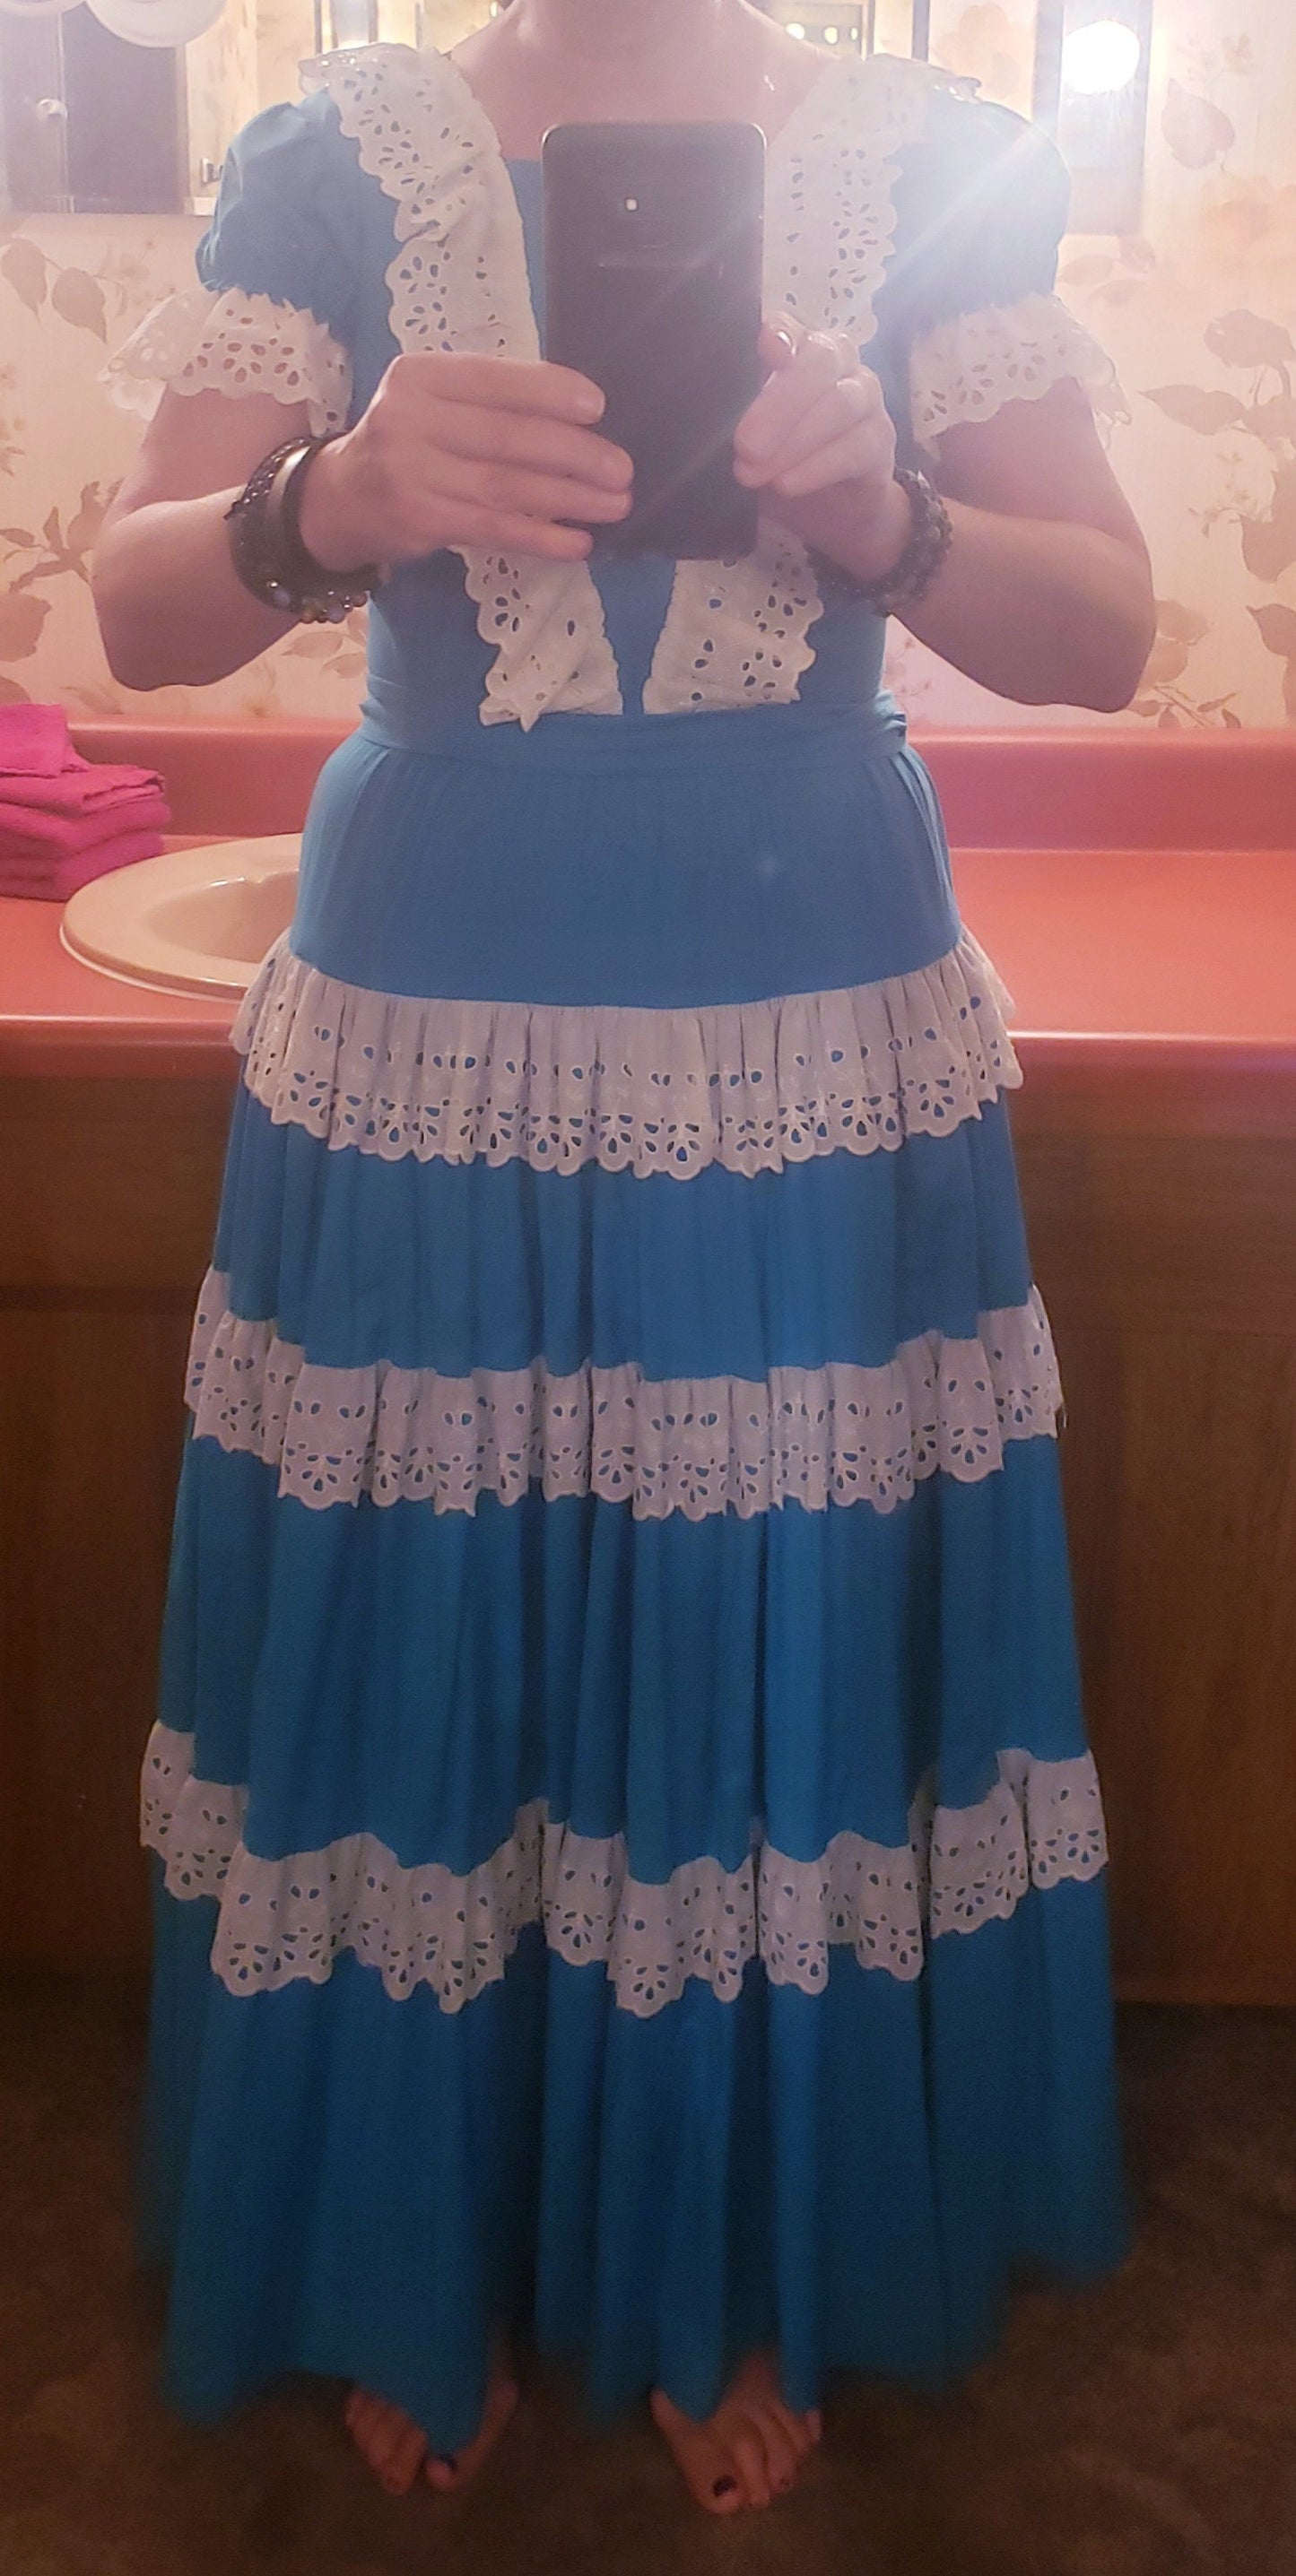 Vintage 70's Prairie Dress in Cyan and Eyelet Lace